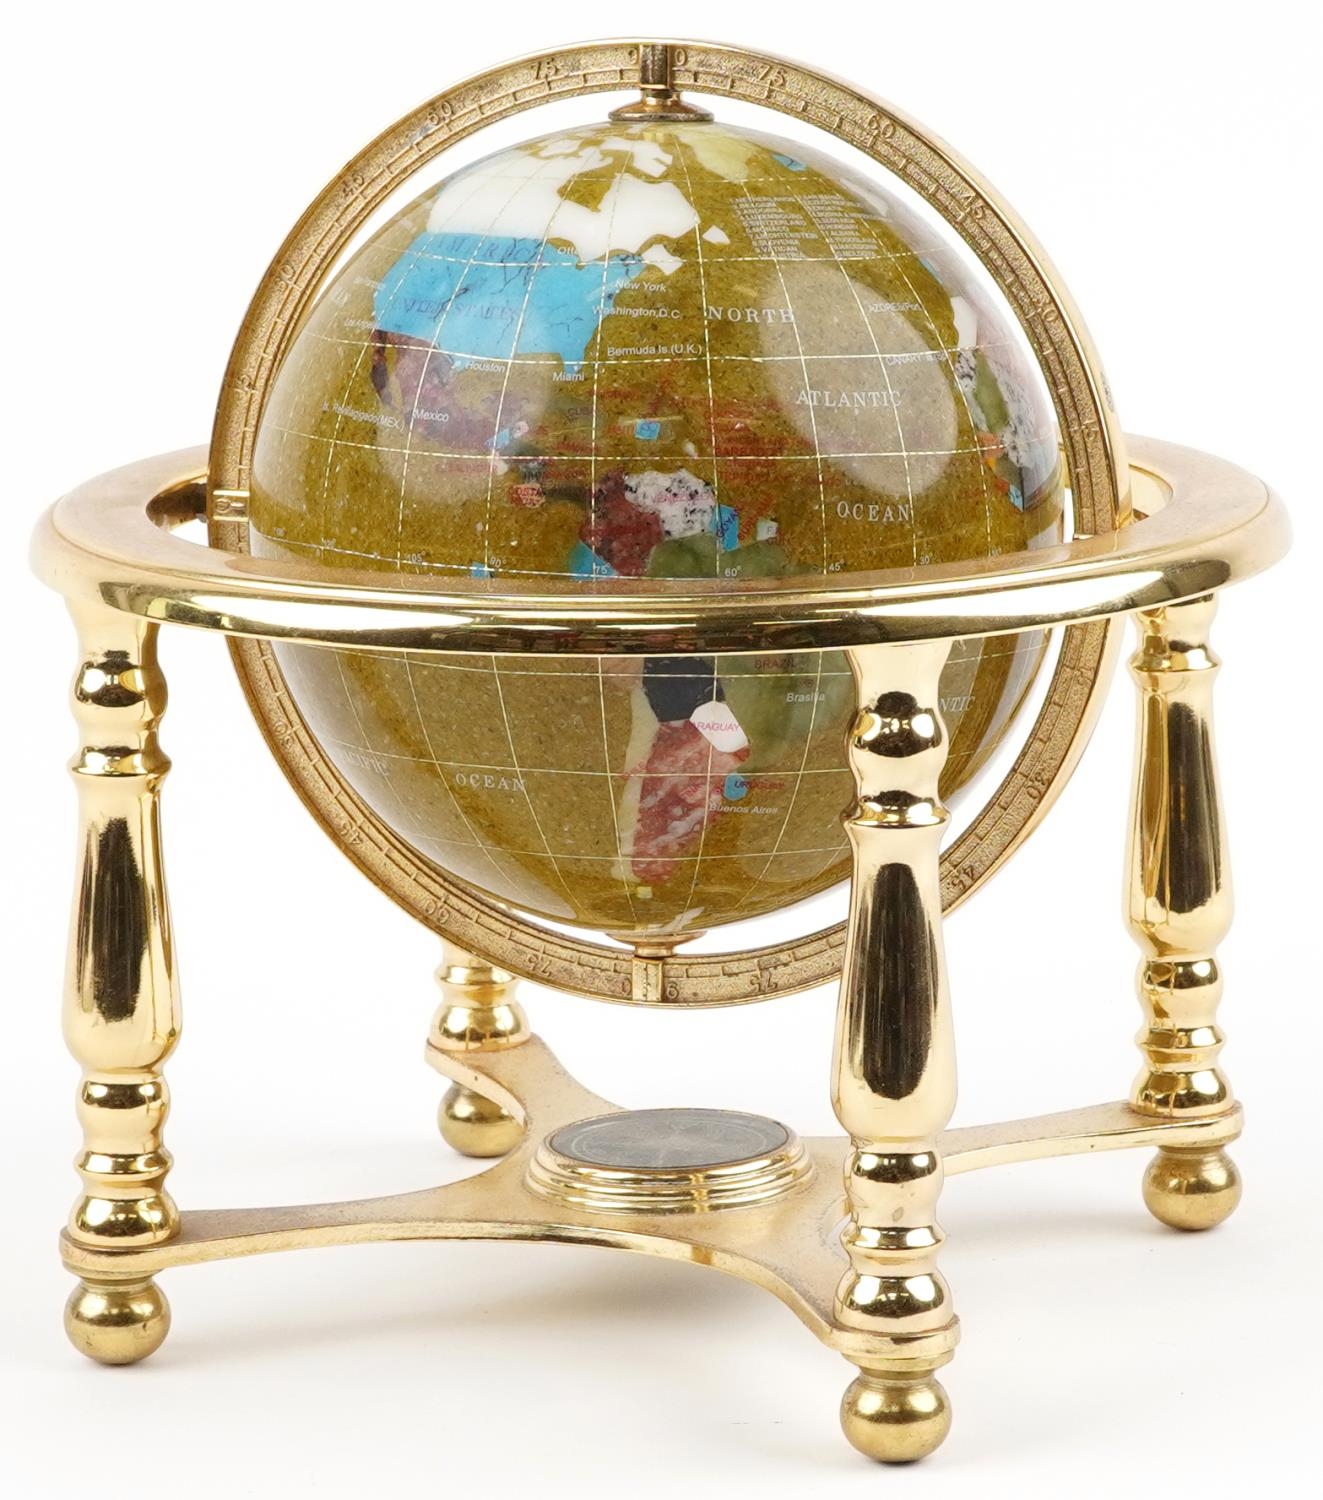 Contemporary polished stone table globe with brass stand and compass under tier, 23.5cm high - Image 2 of 3